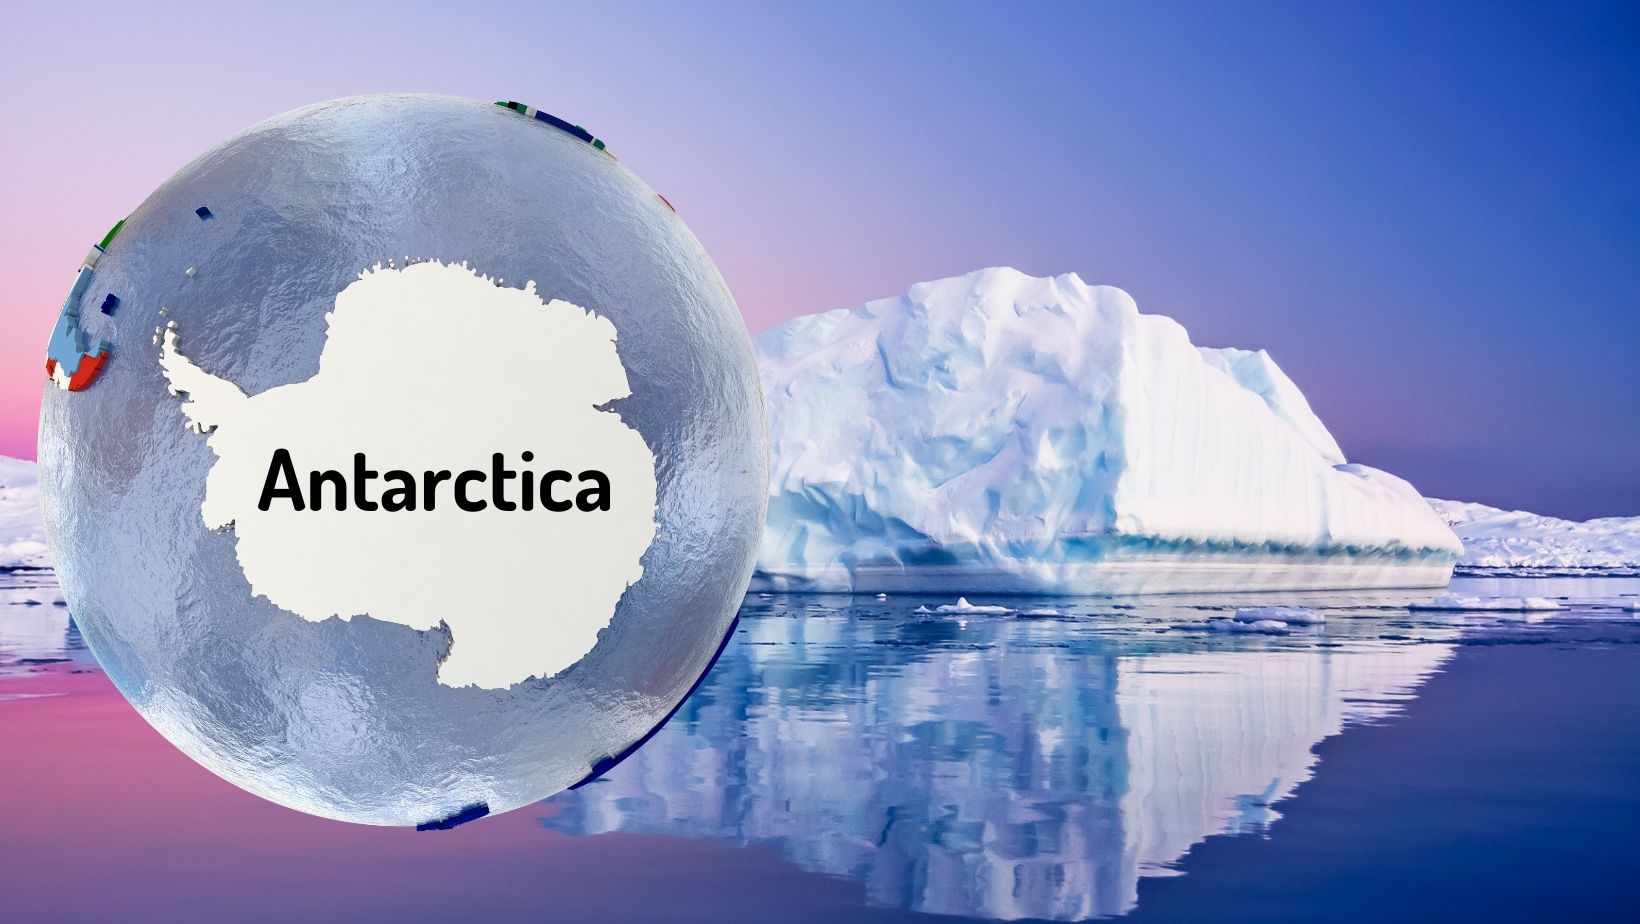 Antarctica, the most ‘peaceful’ continent